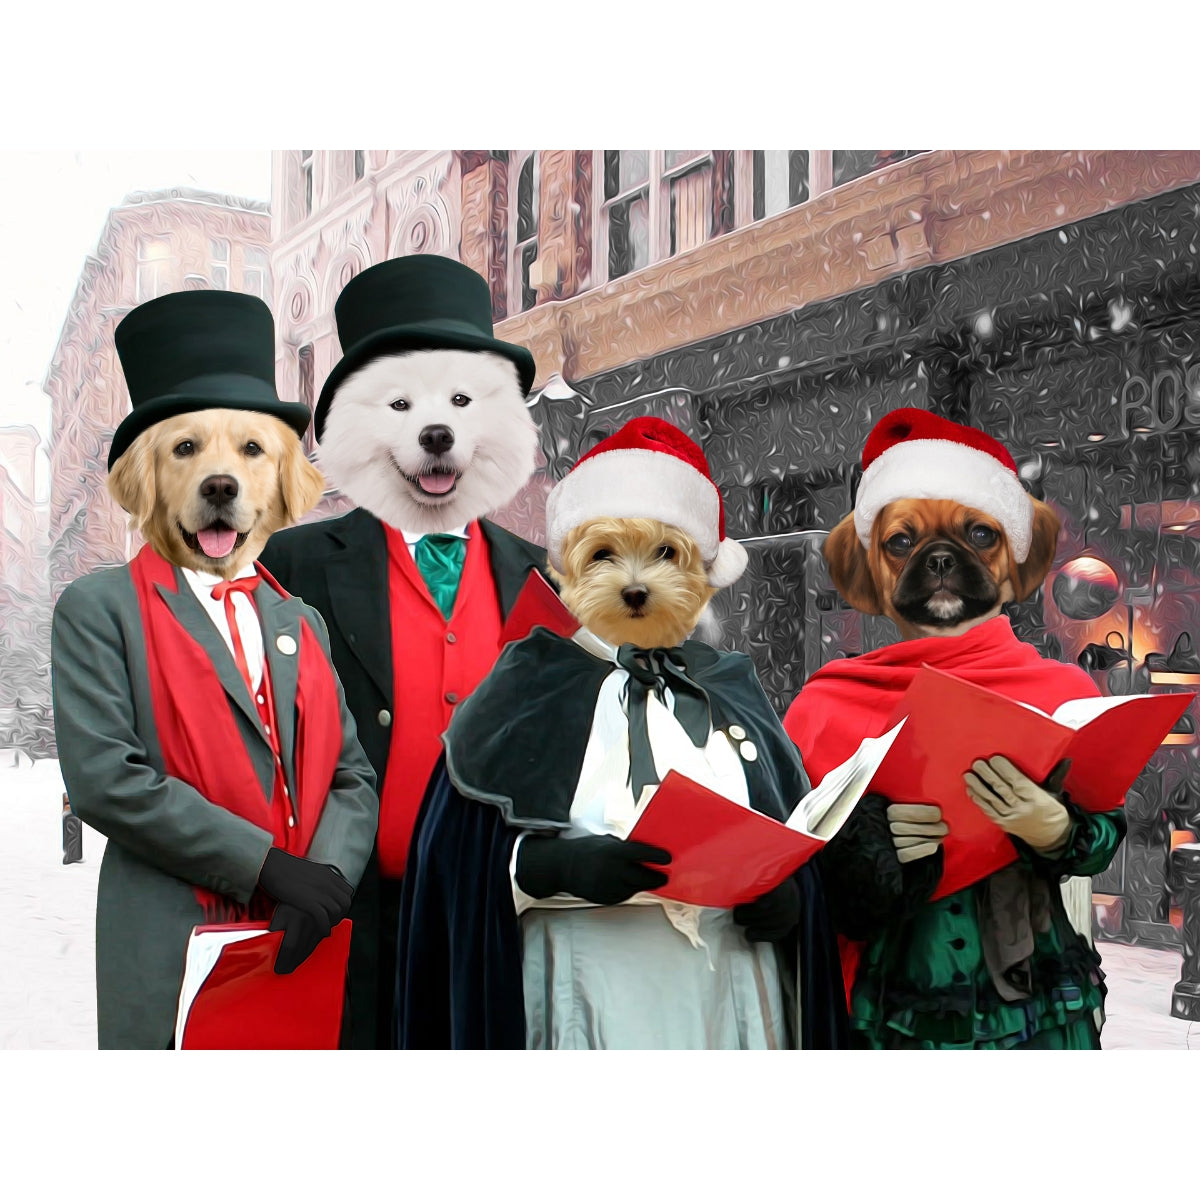 Merry Melodies Choir: Paw & Glory, paw and glory, drawing dog portraits, custom pet portraits south africa, pet portraits usa, pet portraits in oils, digital pet paintings, pet portraits leeds, pet portrait